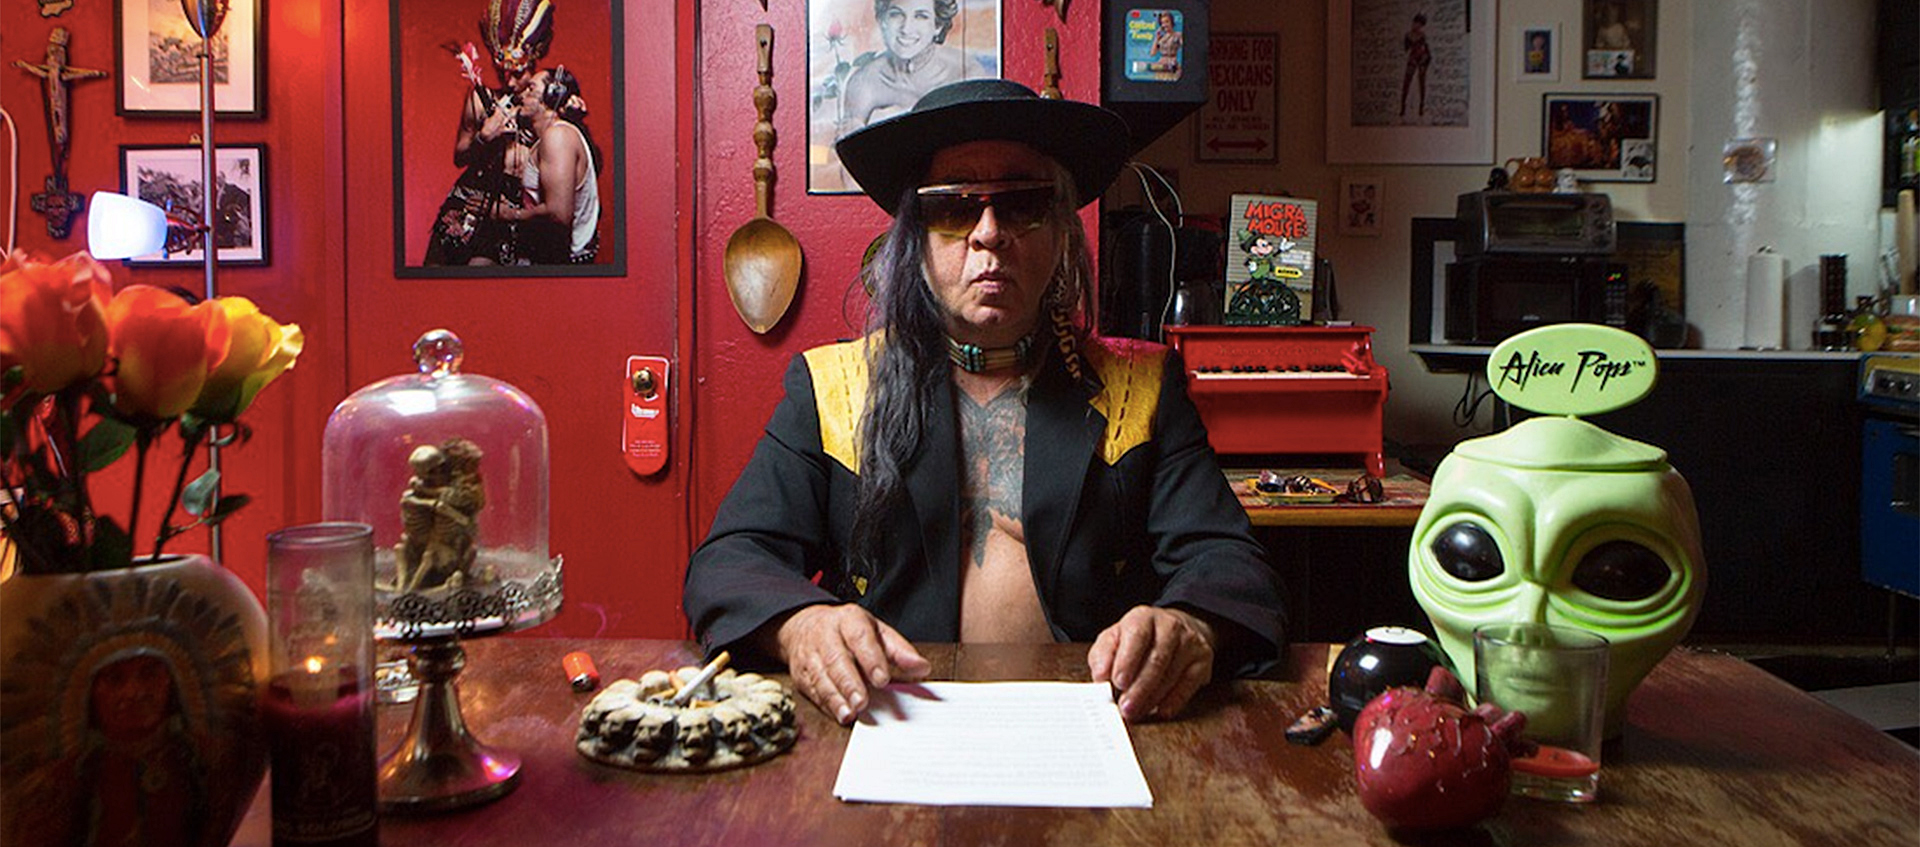 Gómez-Peña is seated in his home studio. He is wearing a black jacket with no shirt underneath. He wears a hat and in front of him is a piece of paper. To his right is a plastic, green alien head and to his left is an ashtray with a cigarette resting in it.